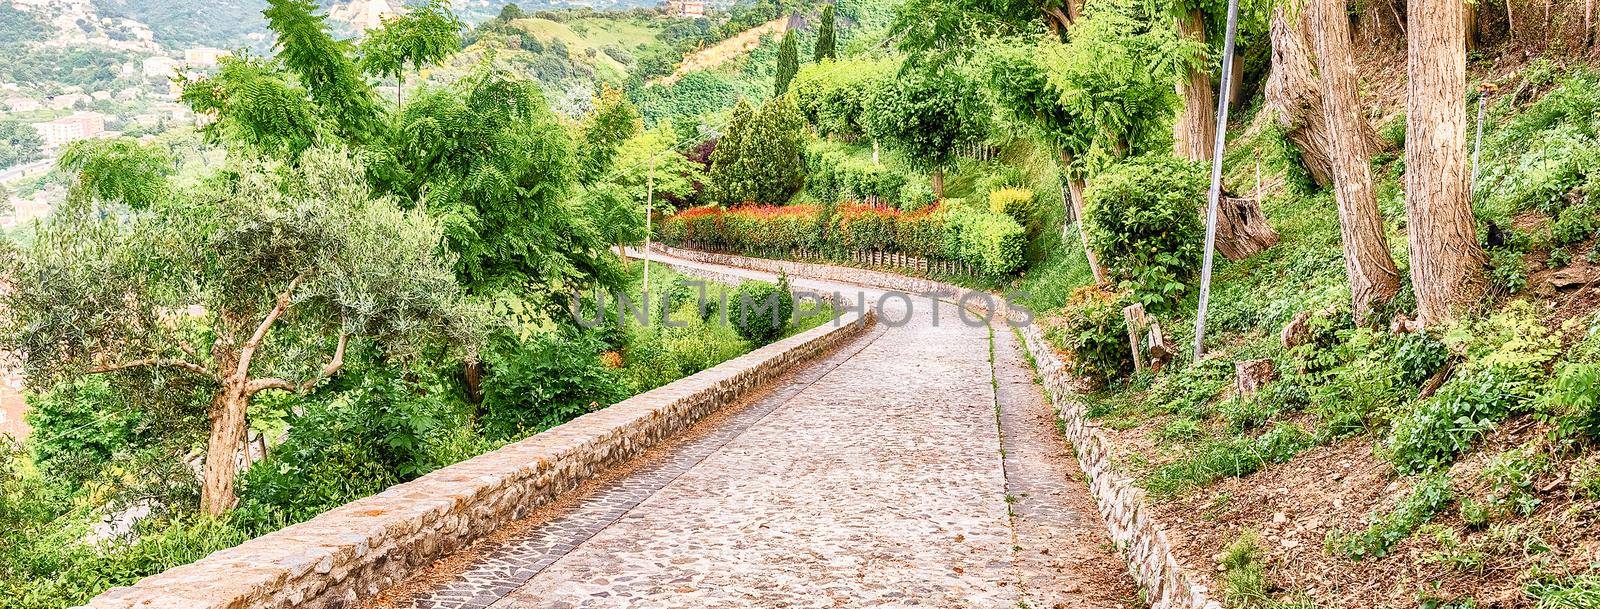 Stone paved road surrounded by nature on the hill near the city of Cosenza, Italy